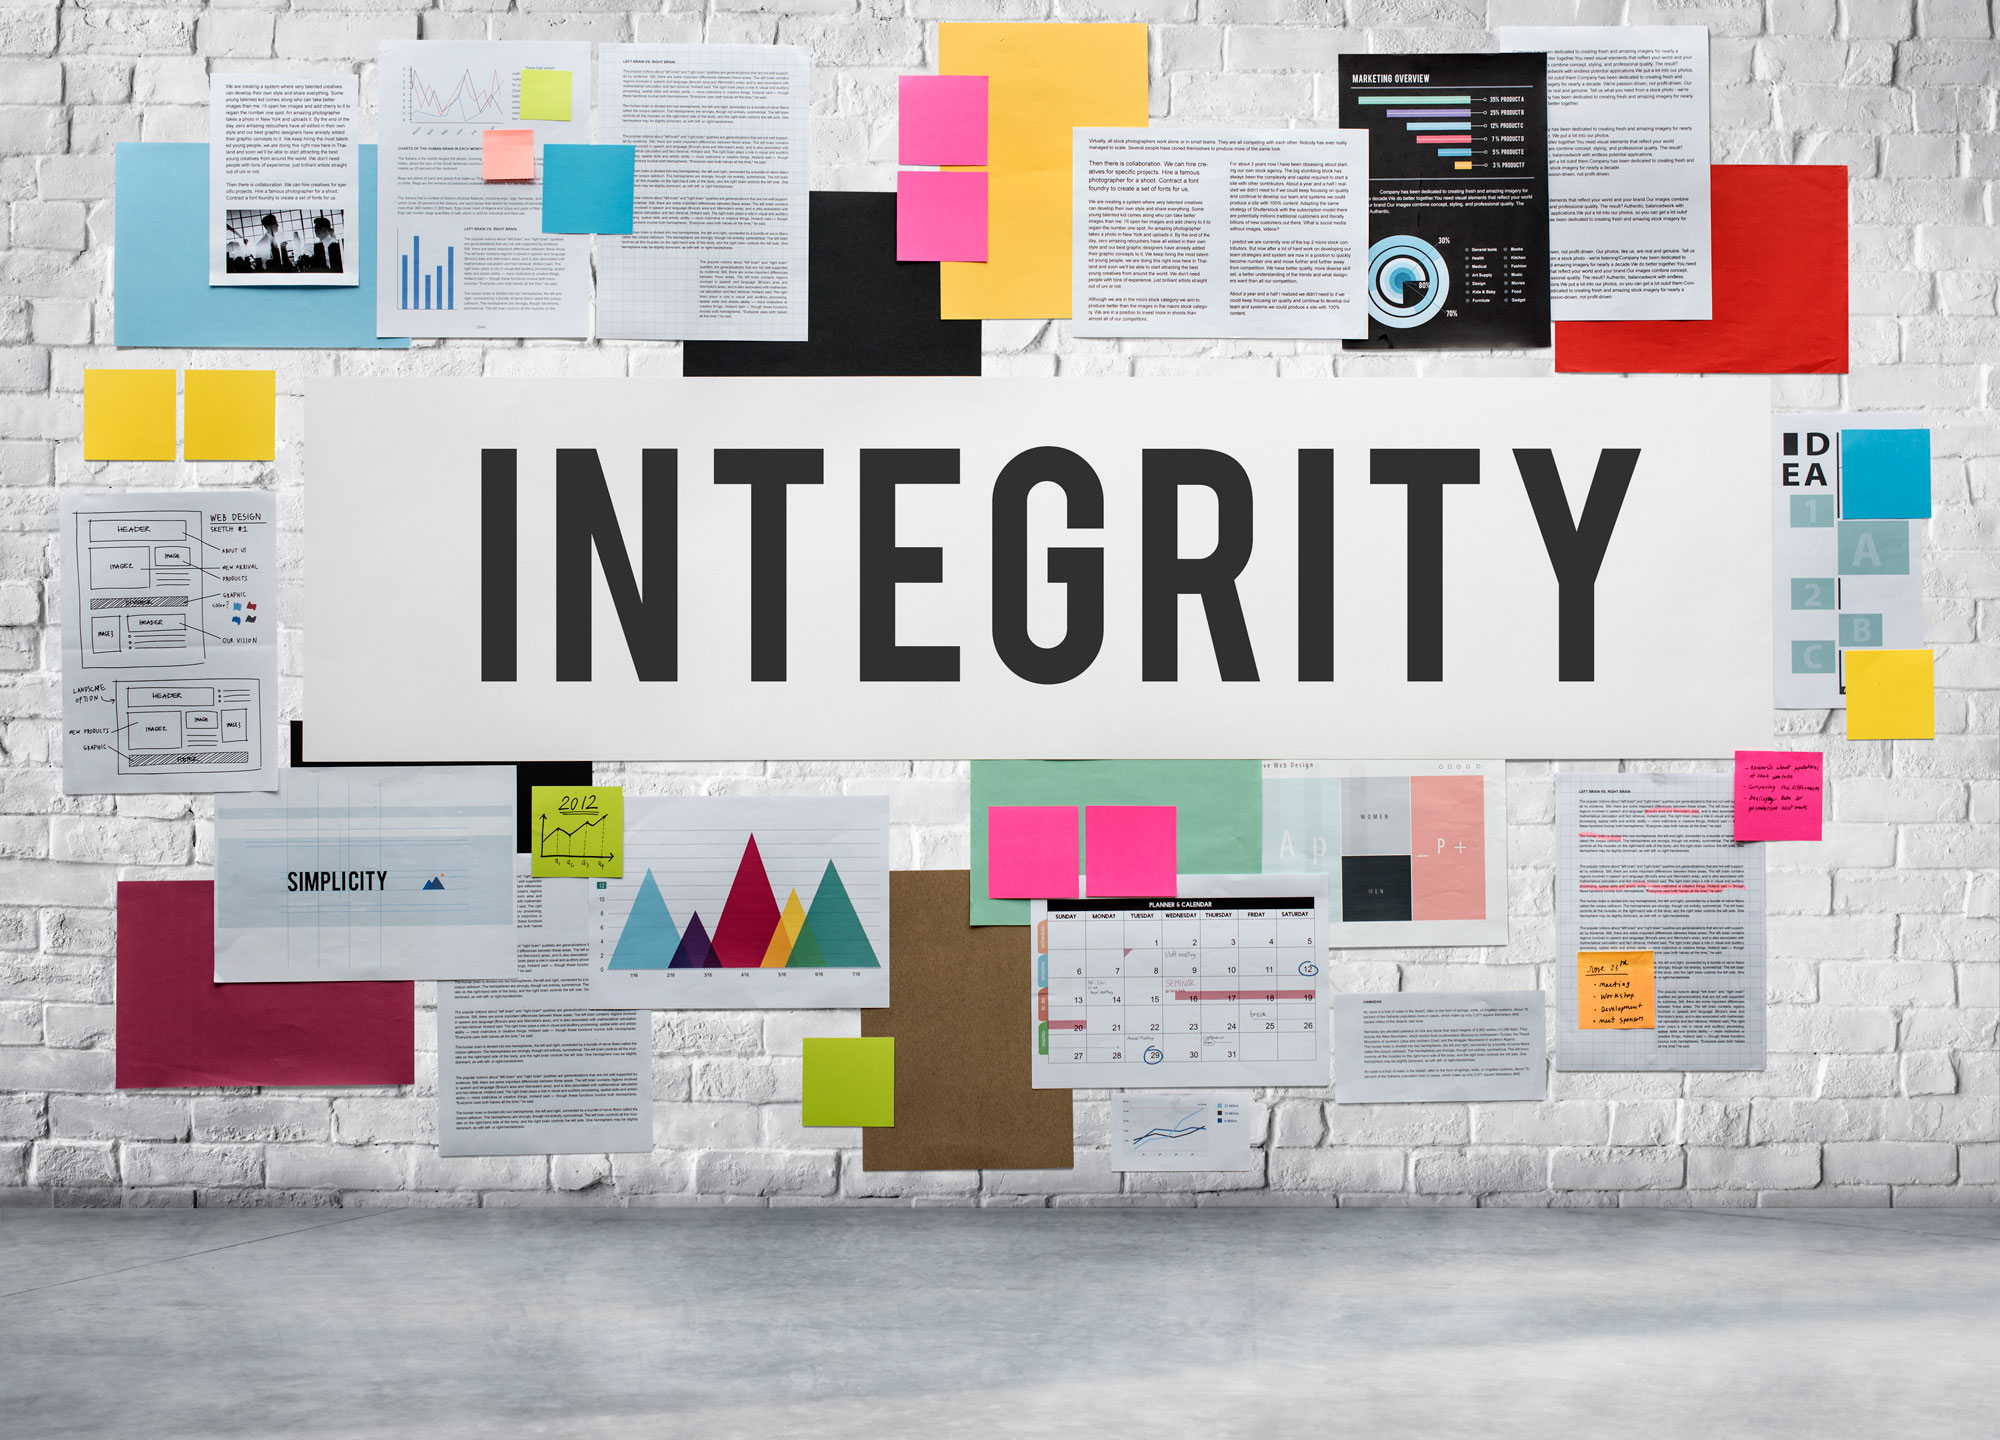 Integrity - CANI Marketing Group is Honest and Transparent